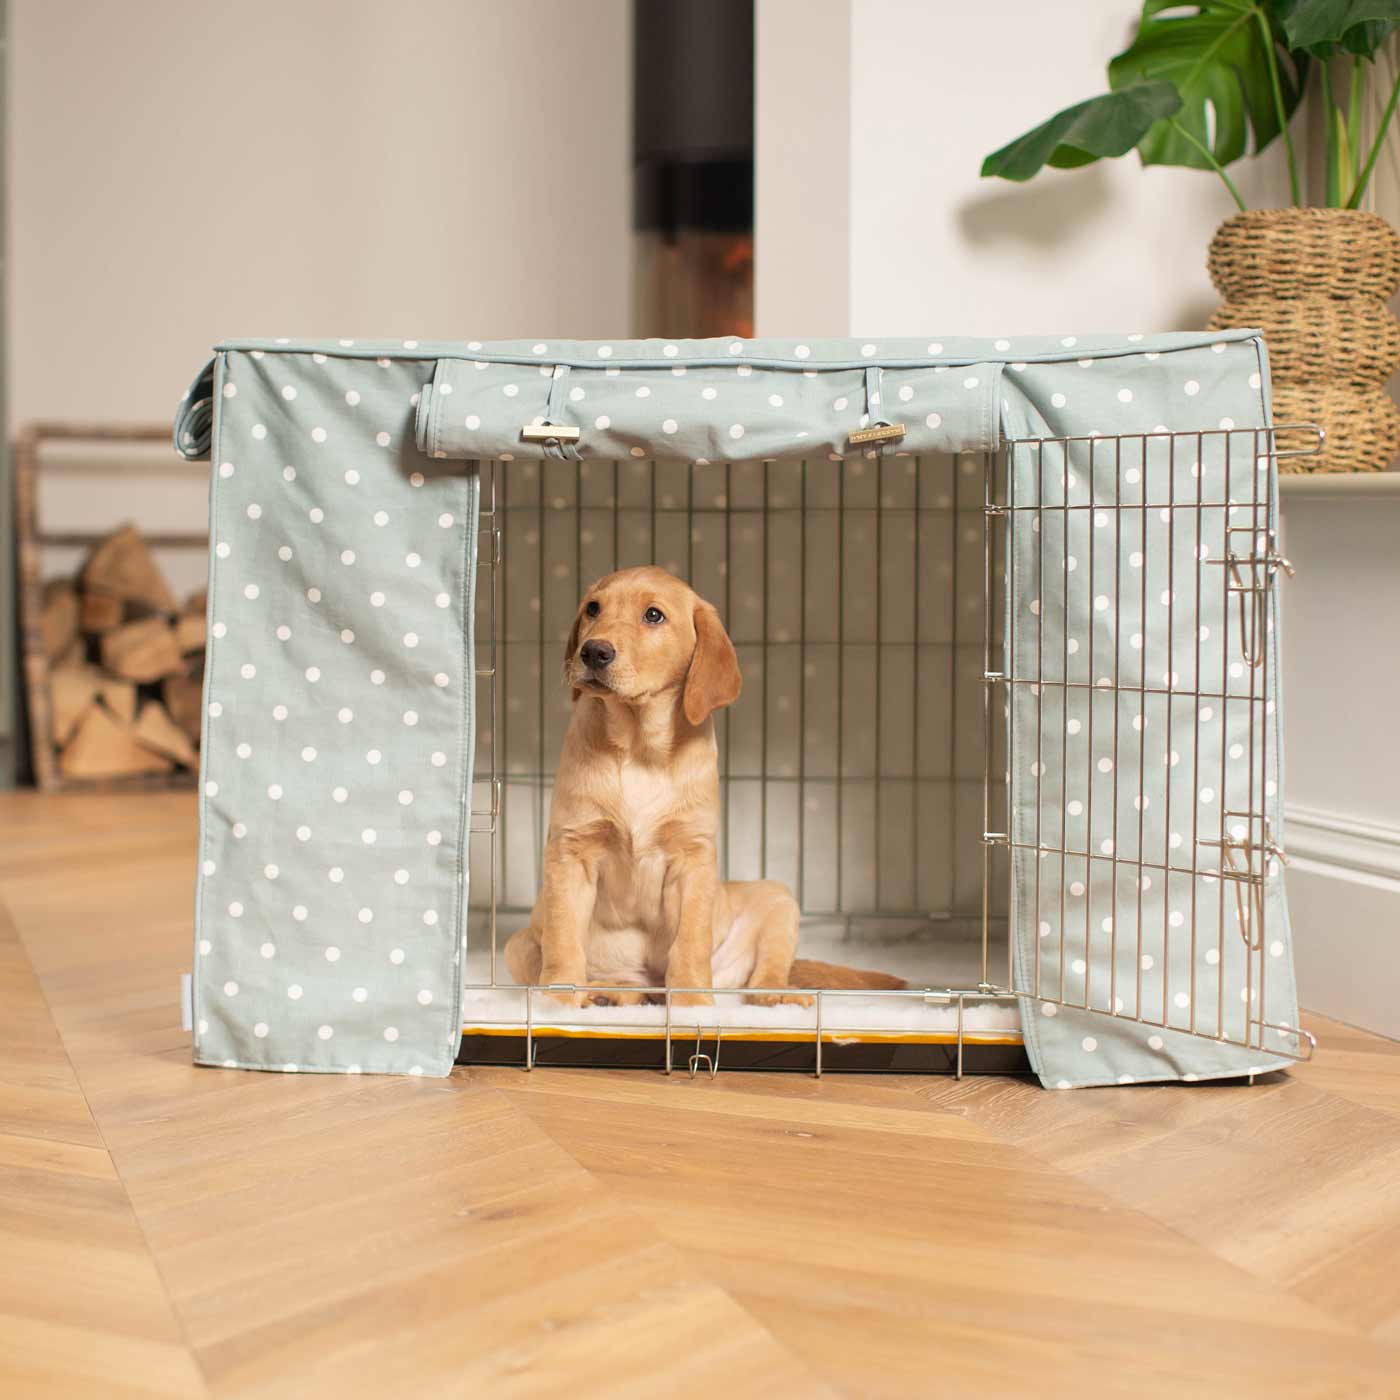 Luxury Silver Dog Cage Set With Crate Cover, The Perfect Dog Crate For The Ultimate Naptime, Available Now at Lords & Labradors US